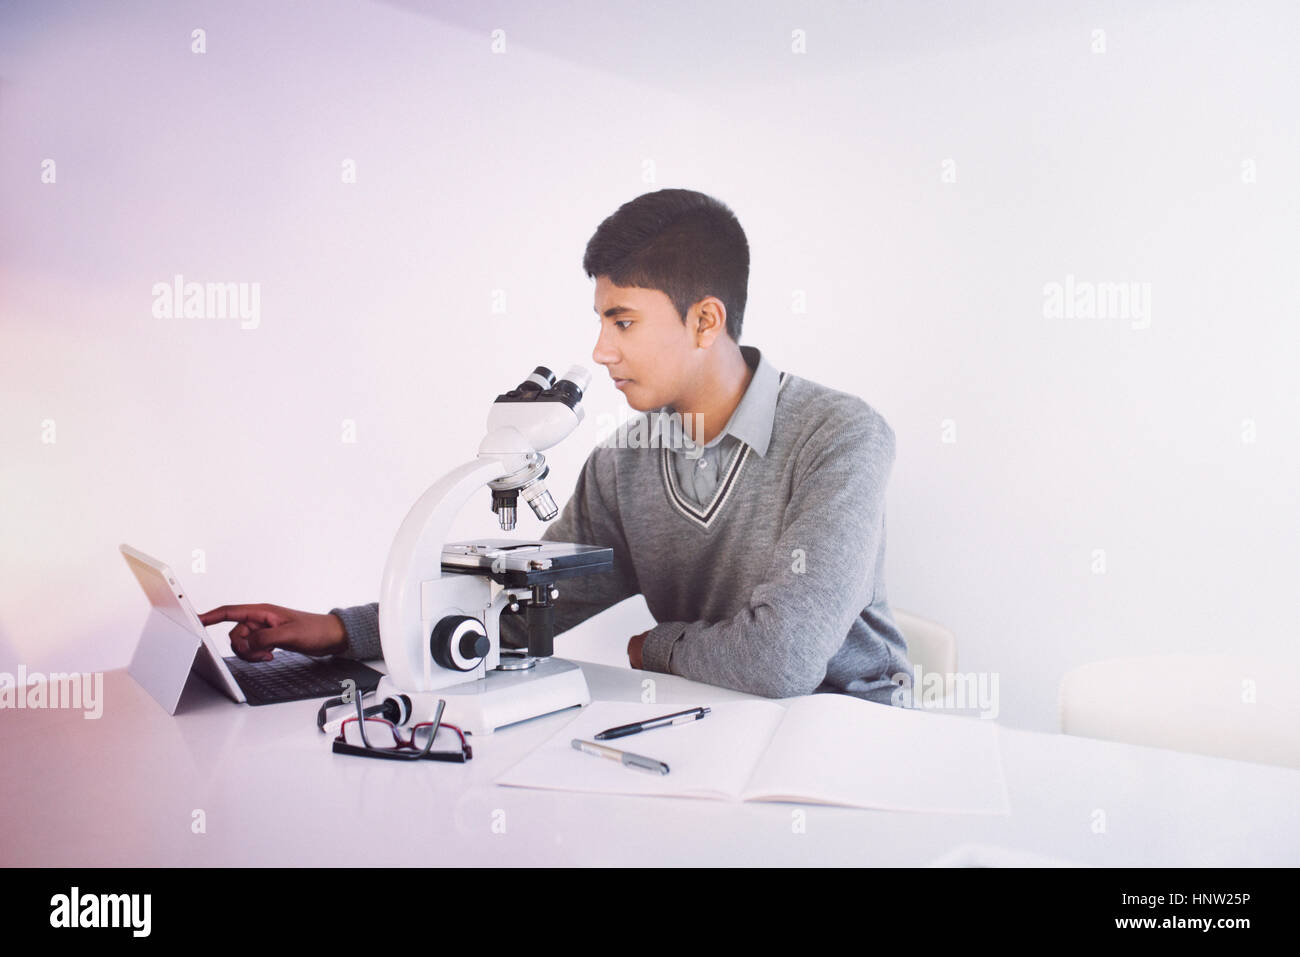 Fidji Indian boy using digital tablet and microscope Banque D'Images